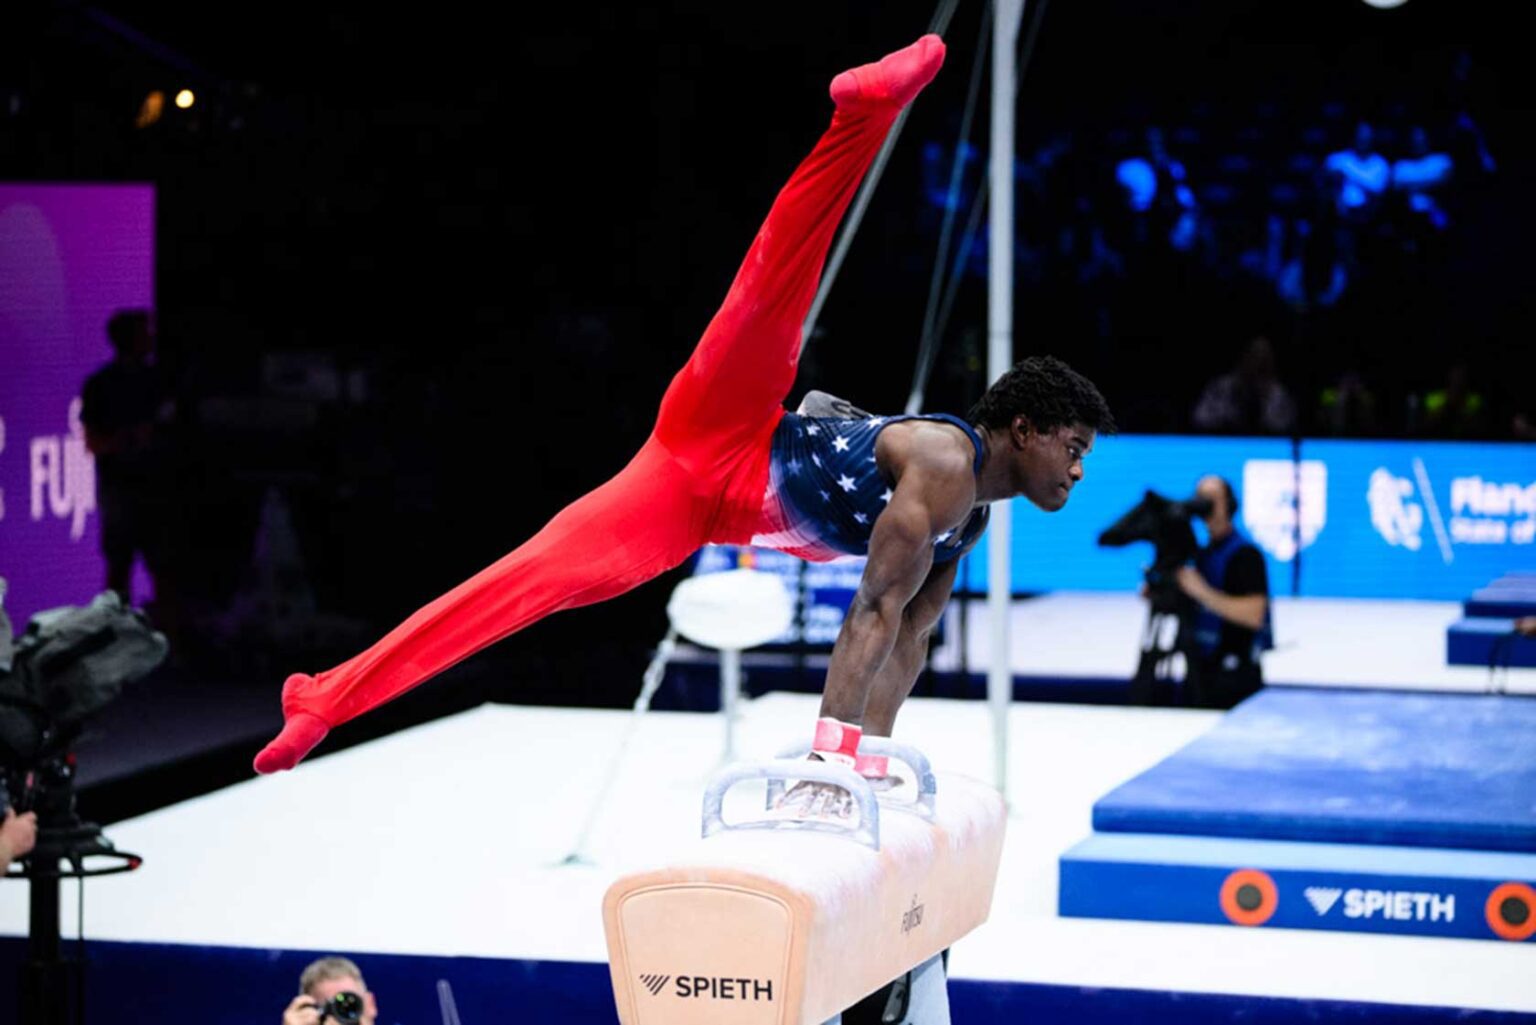 Gymnast Fred Richard: ‘My goal is gold’ - The Bay State Banner